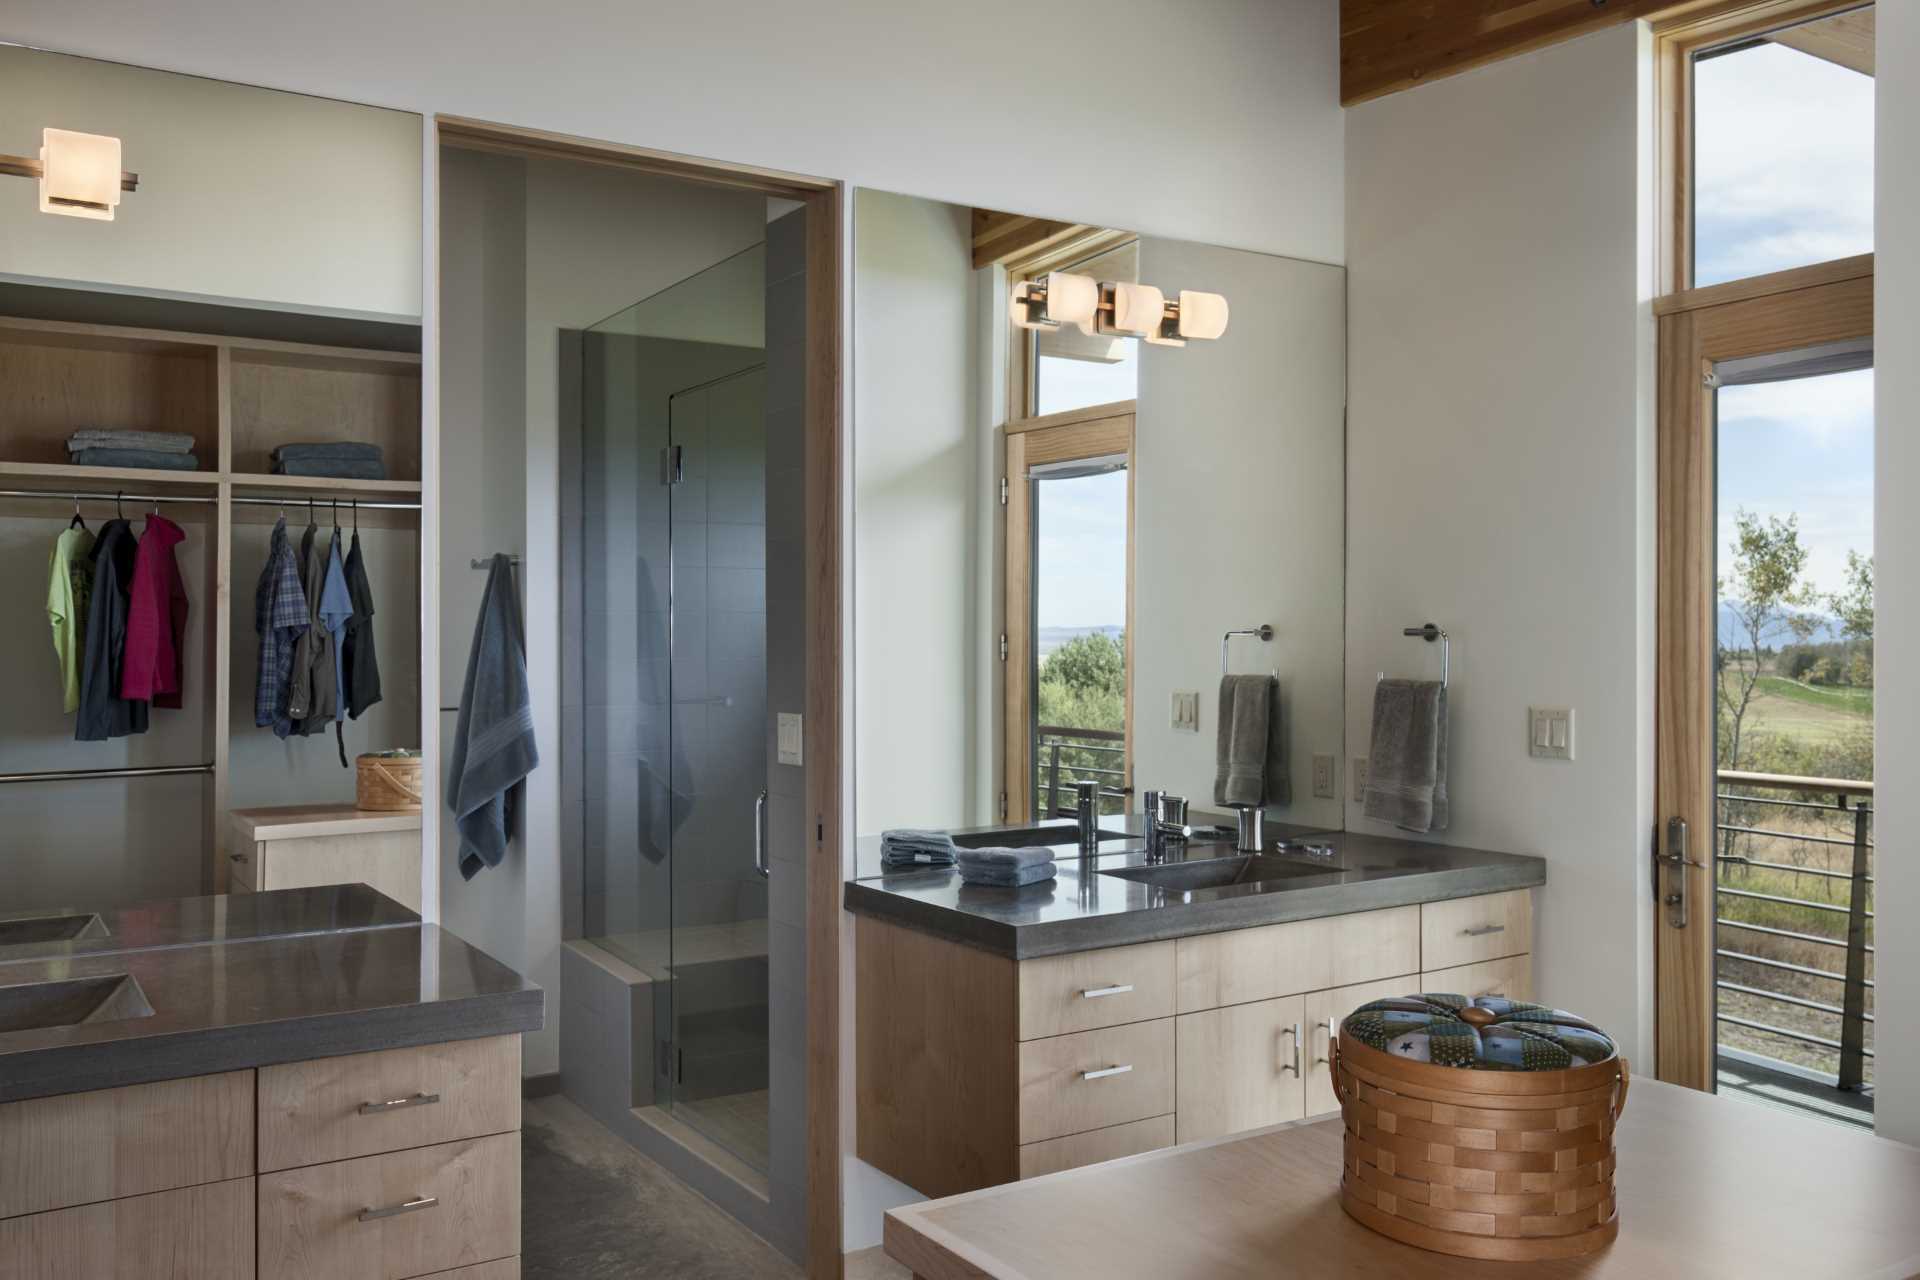 In this bathroom, dual vanities and a custom closet provide ample storage, while the shower is located through a doorway.